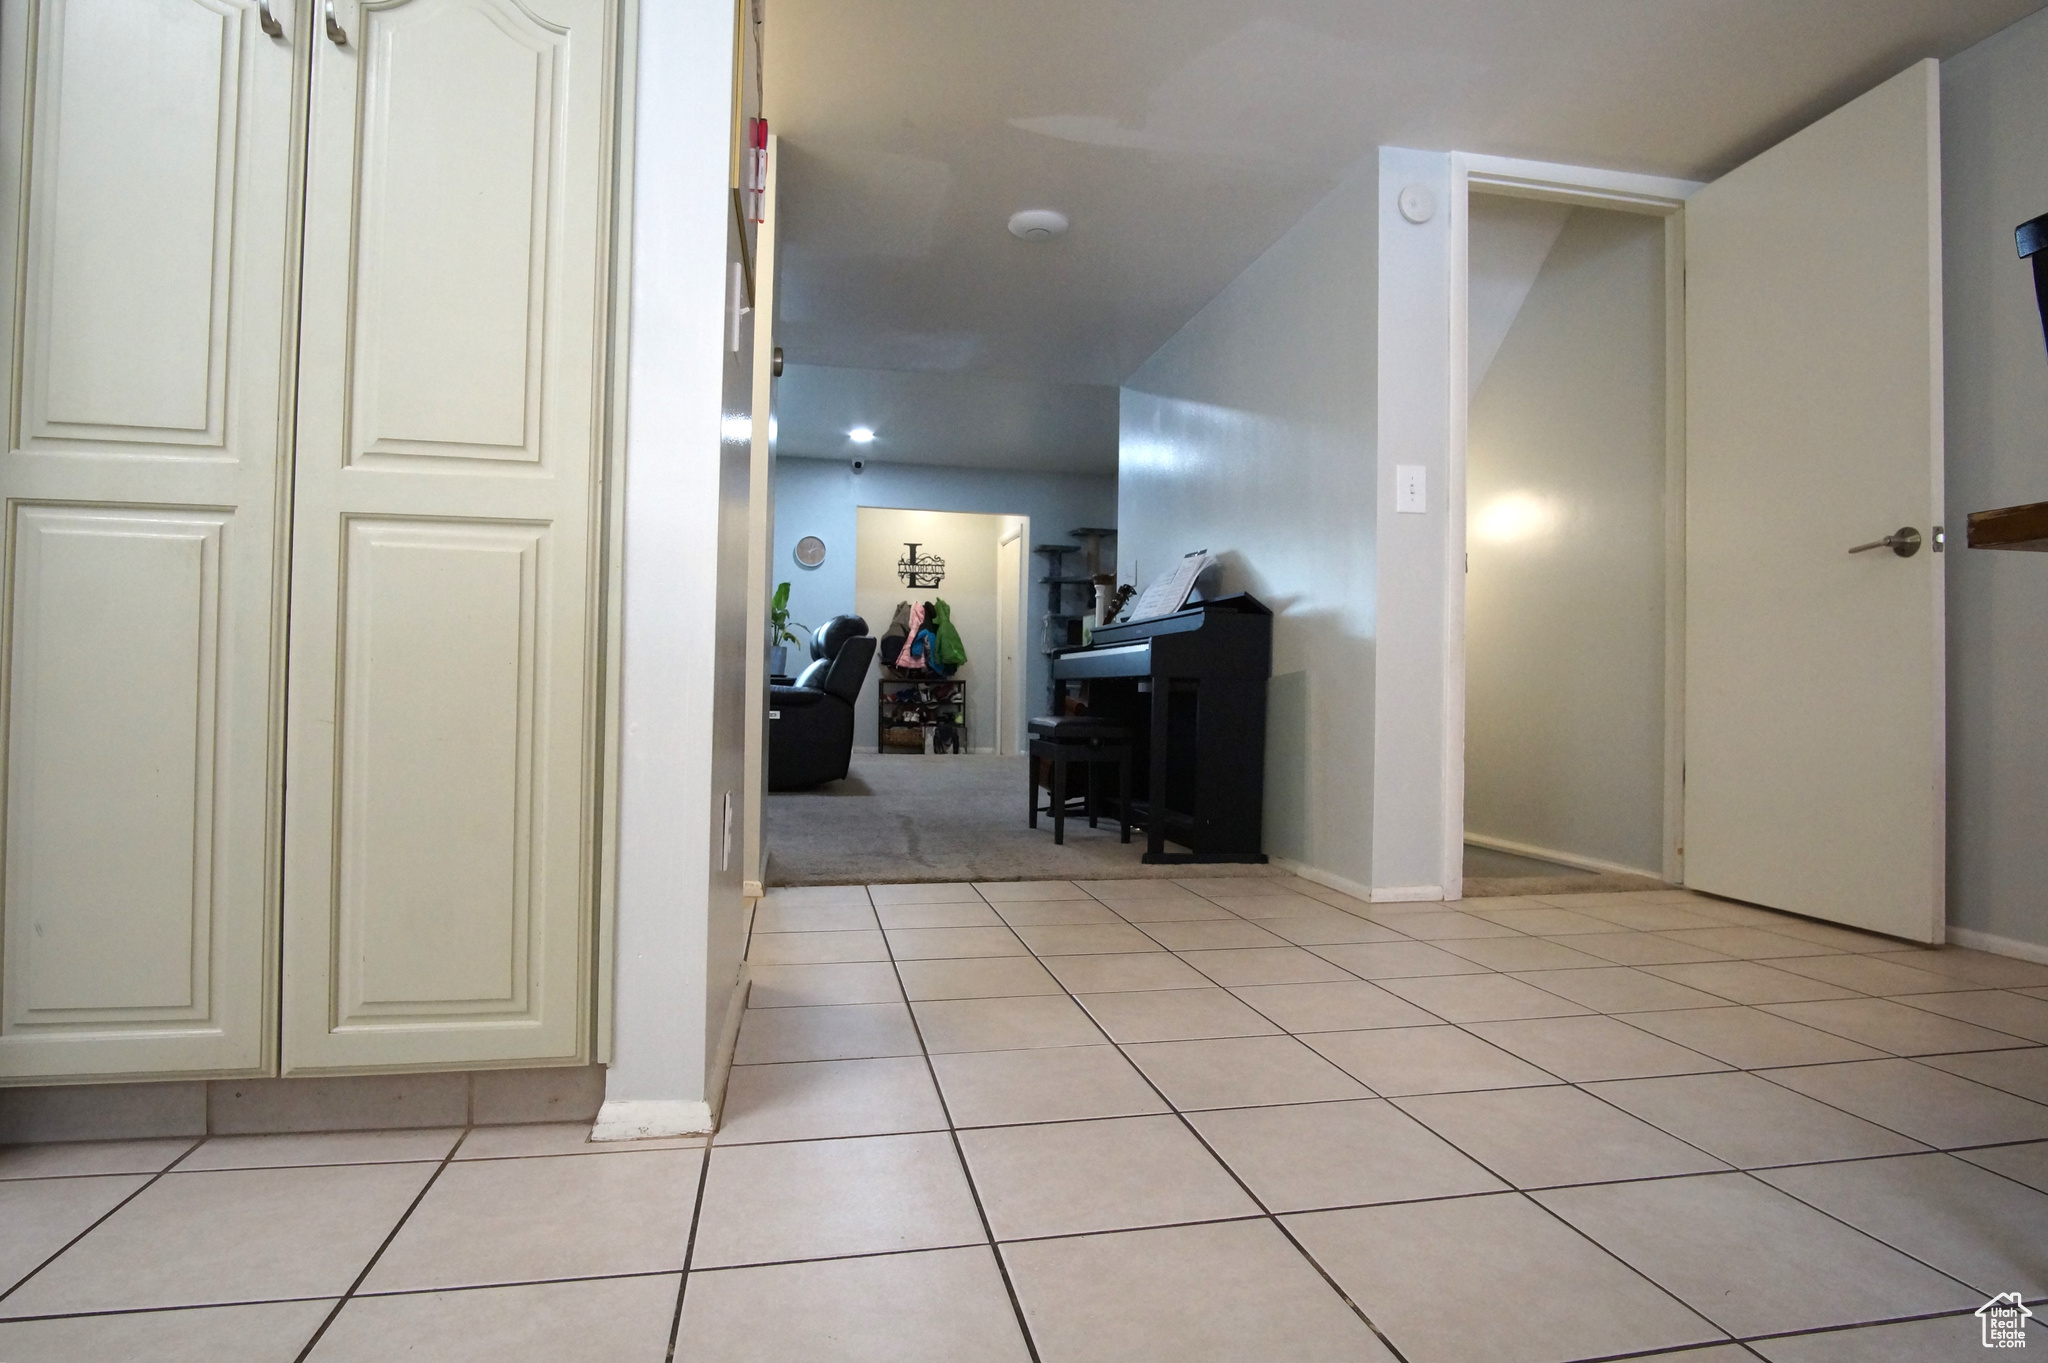 Hallway from Living to Kitchen